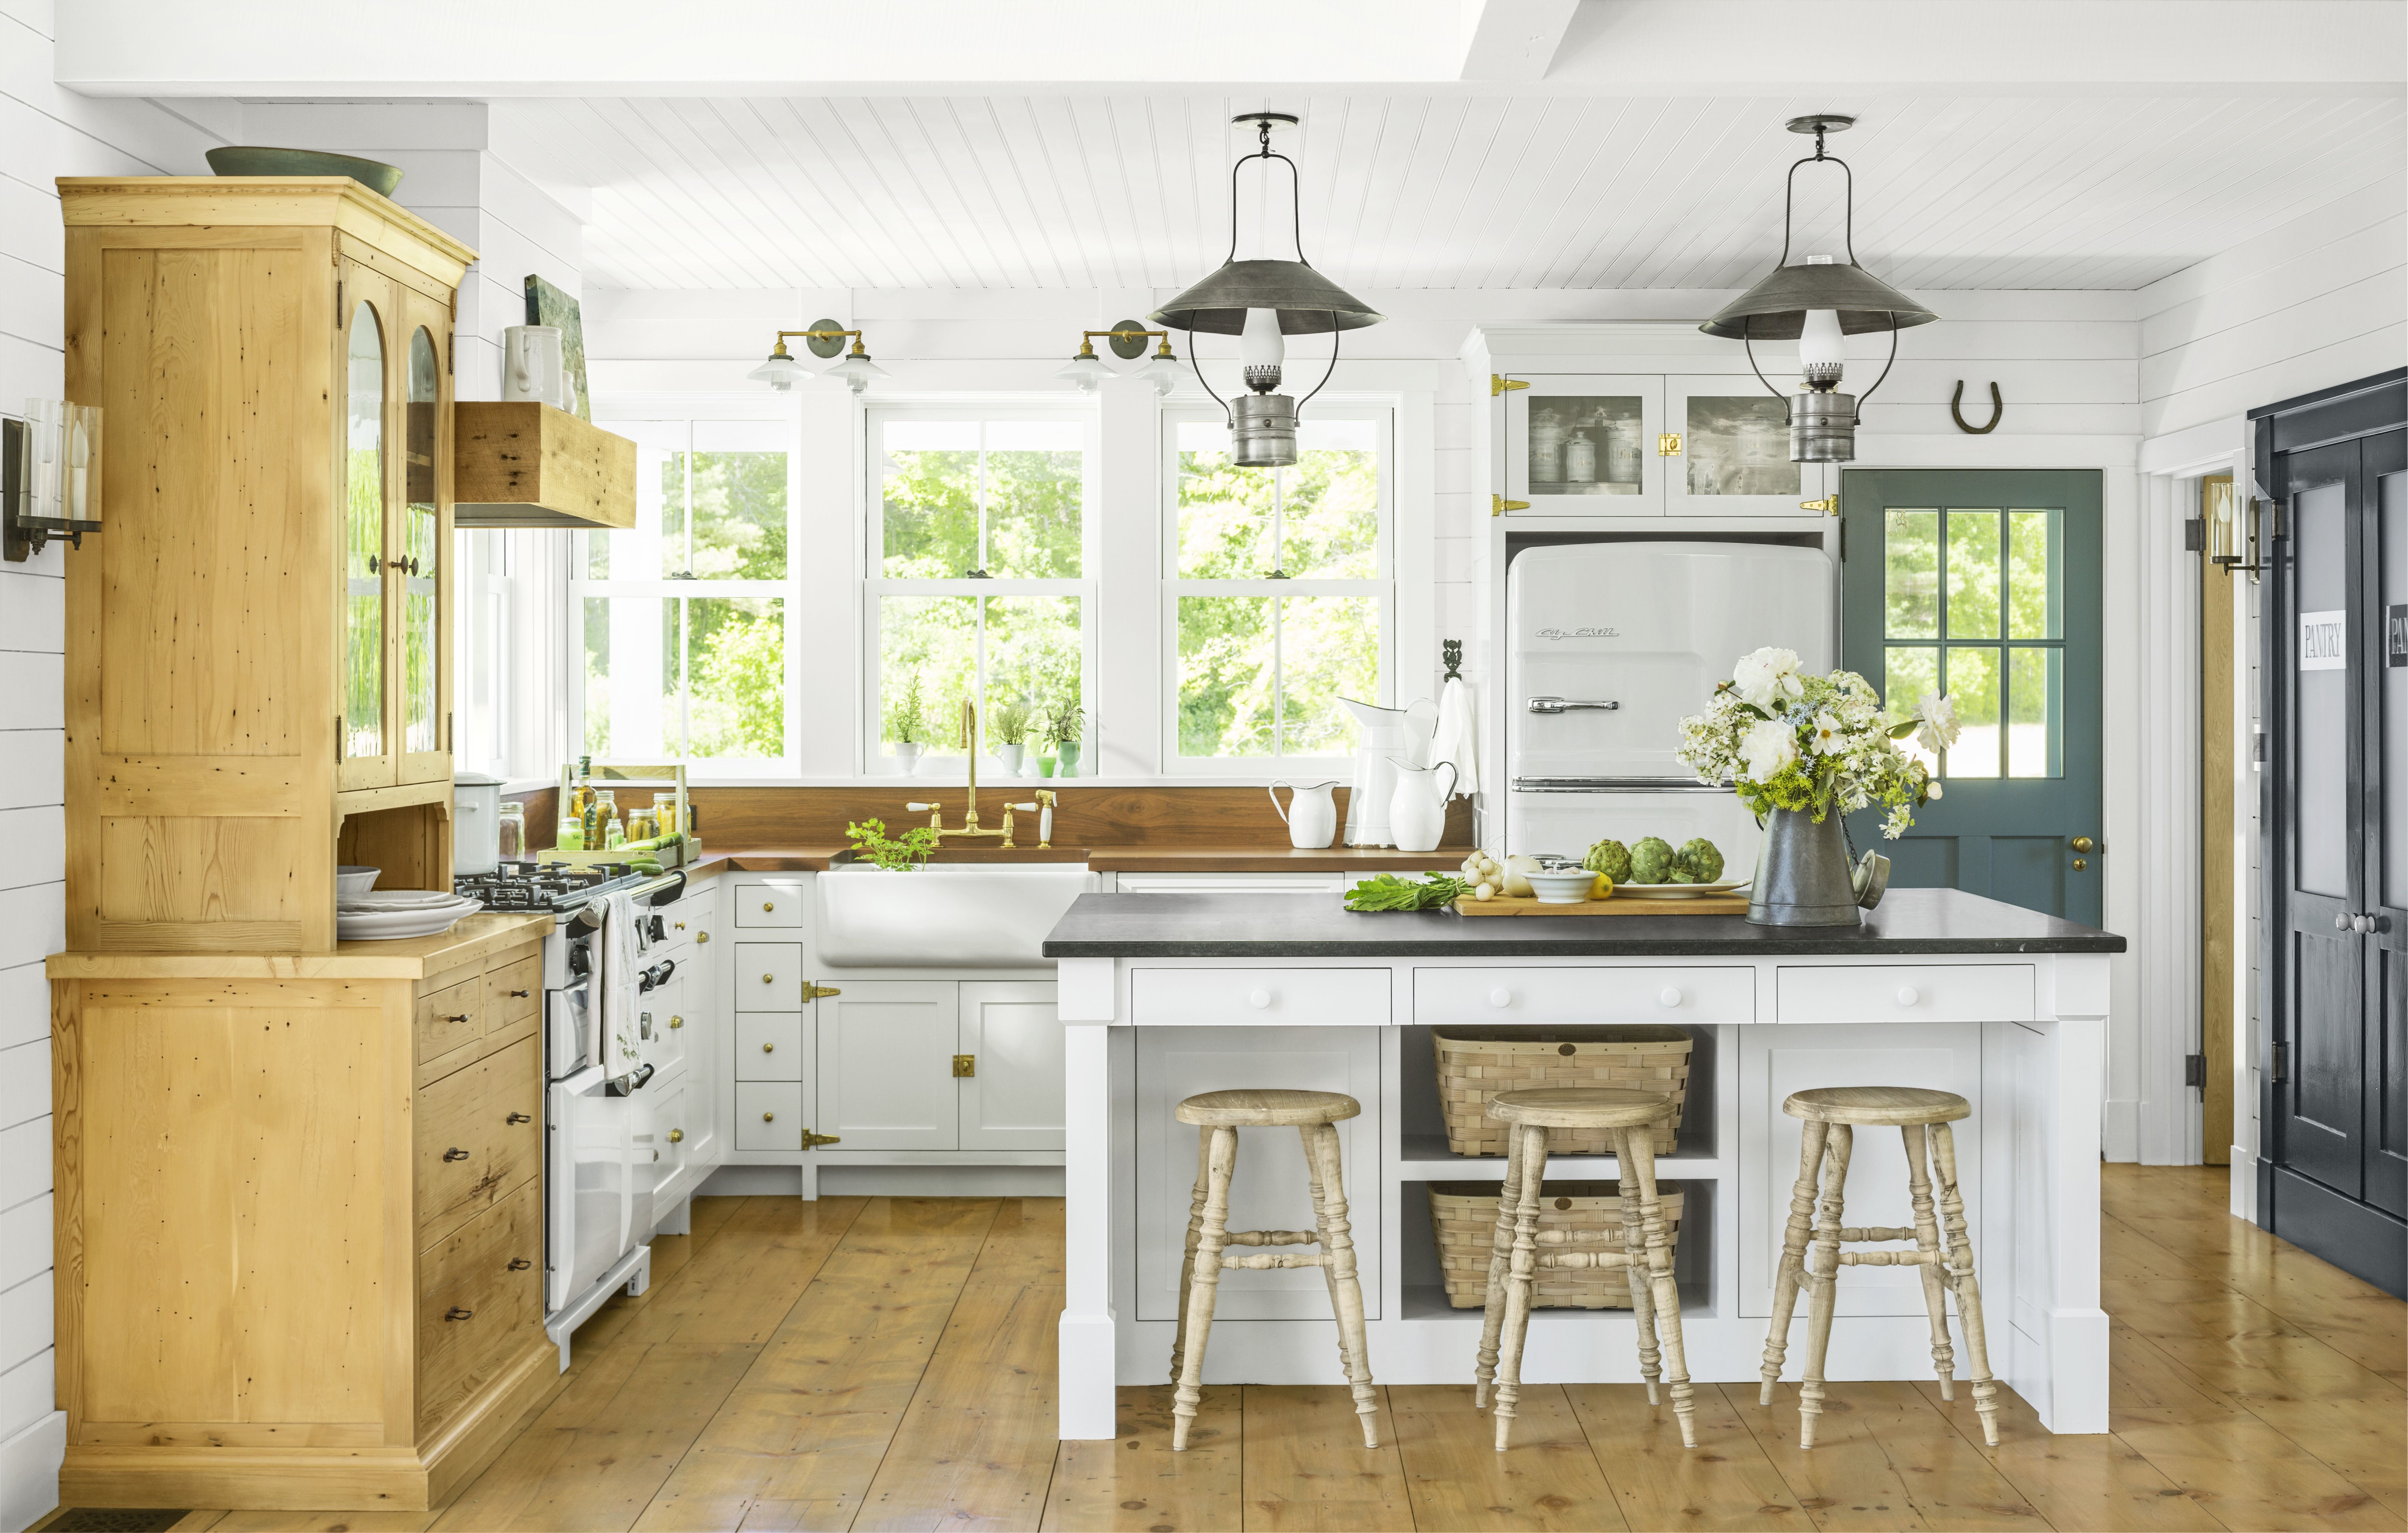 The Facts About How To Paint Kitchen Cabinets: 5 Tips From A Master Painter Revealed